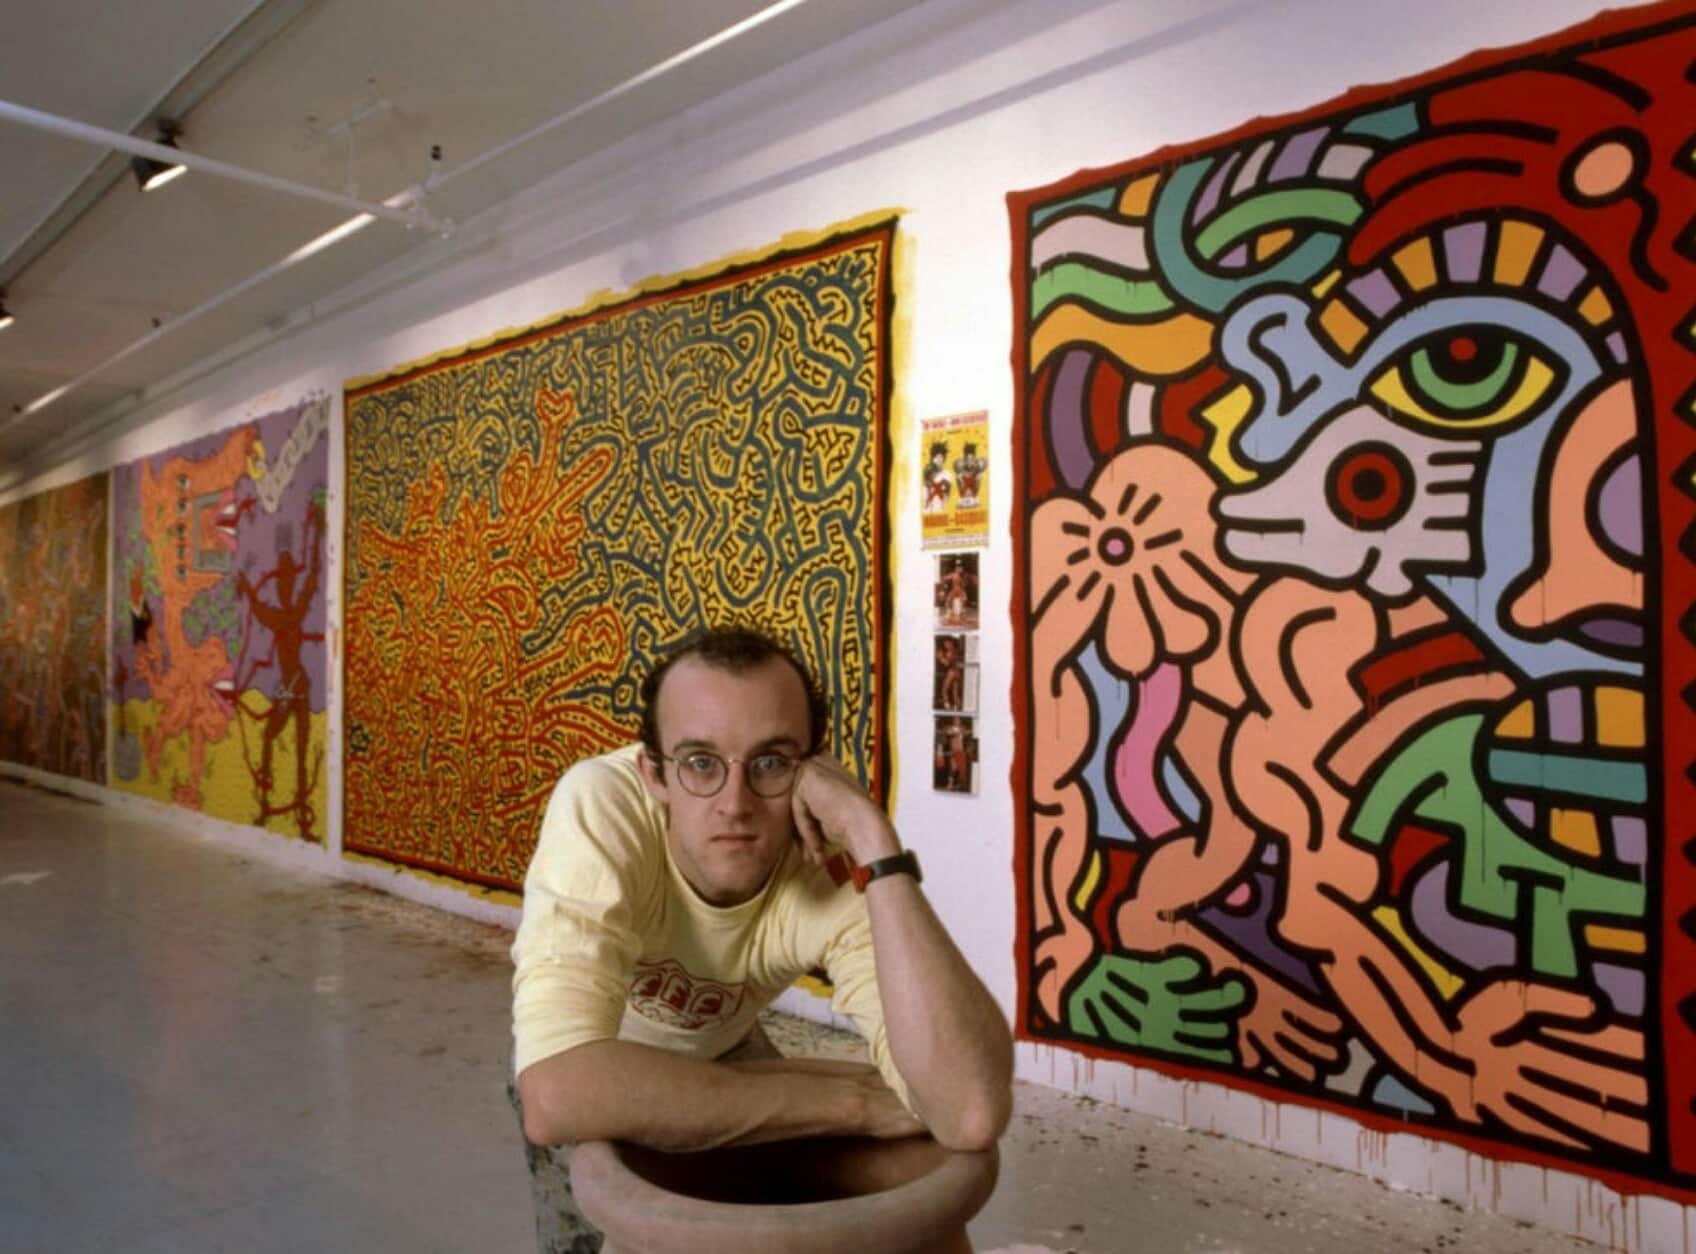 6. "Blond Hair Guy" by artist Keith Haring - wide 8